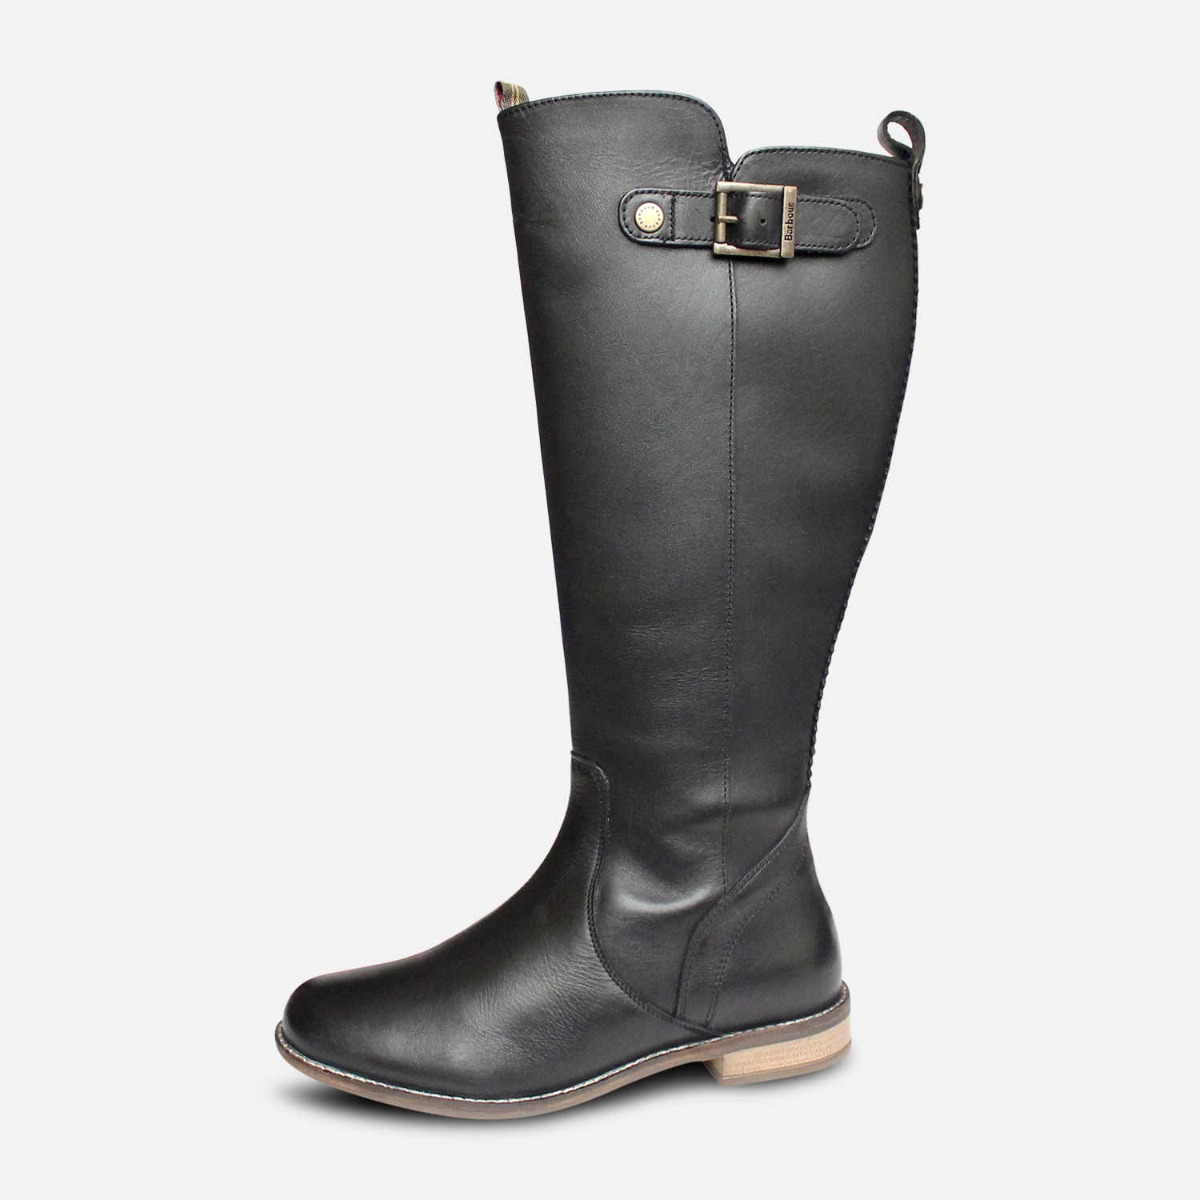 Barbour Black Rebecca II Riding Style Long Boots